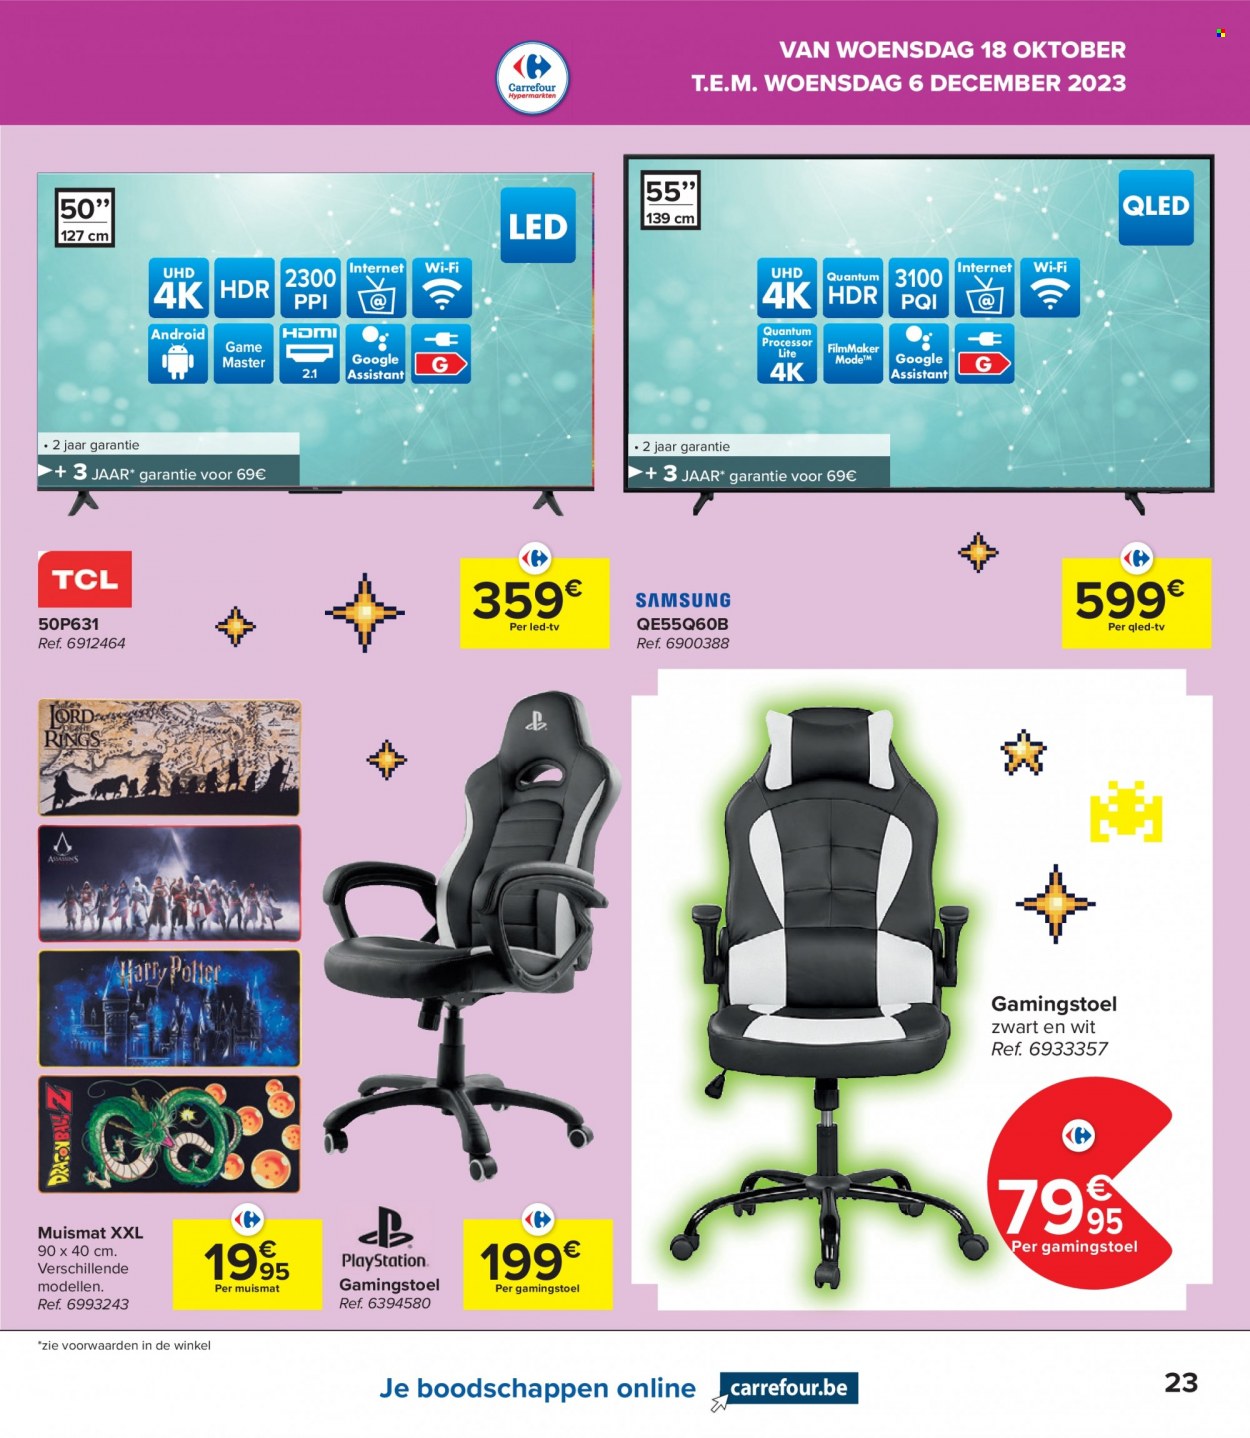 Catalogue Carrefour hypermarkt - 18.10.2023 - 6.12.2023. Page 23.